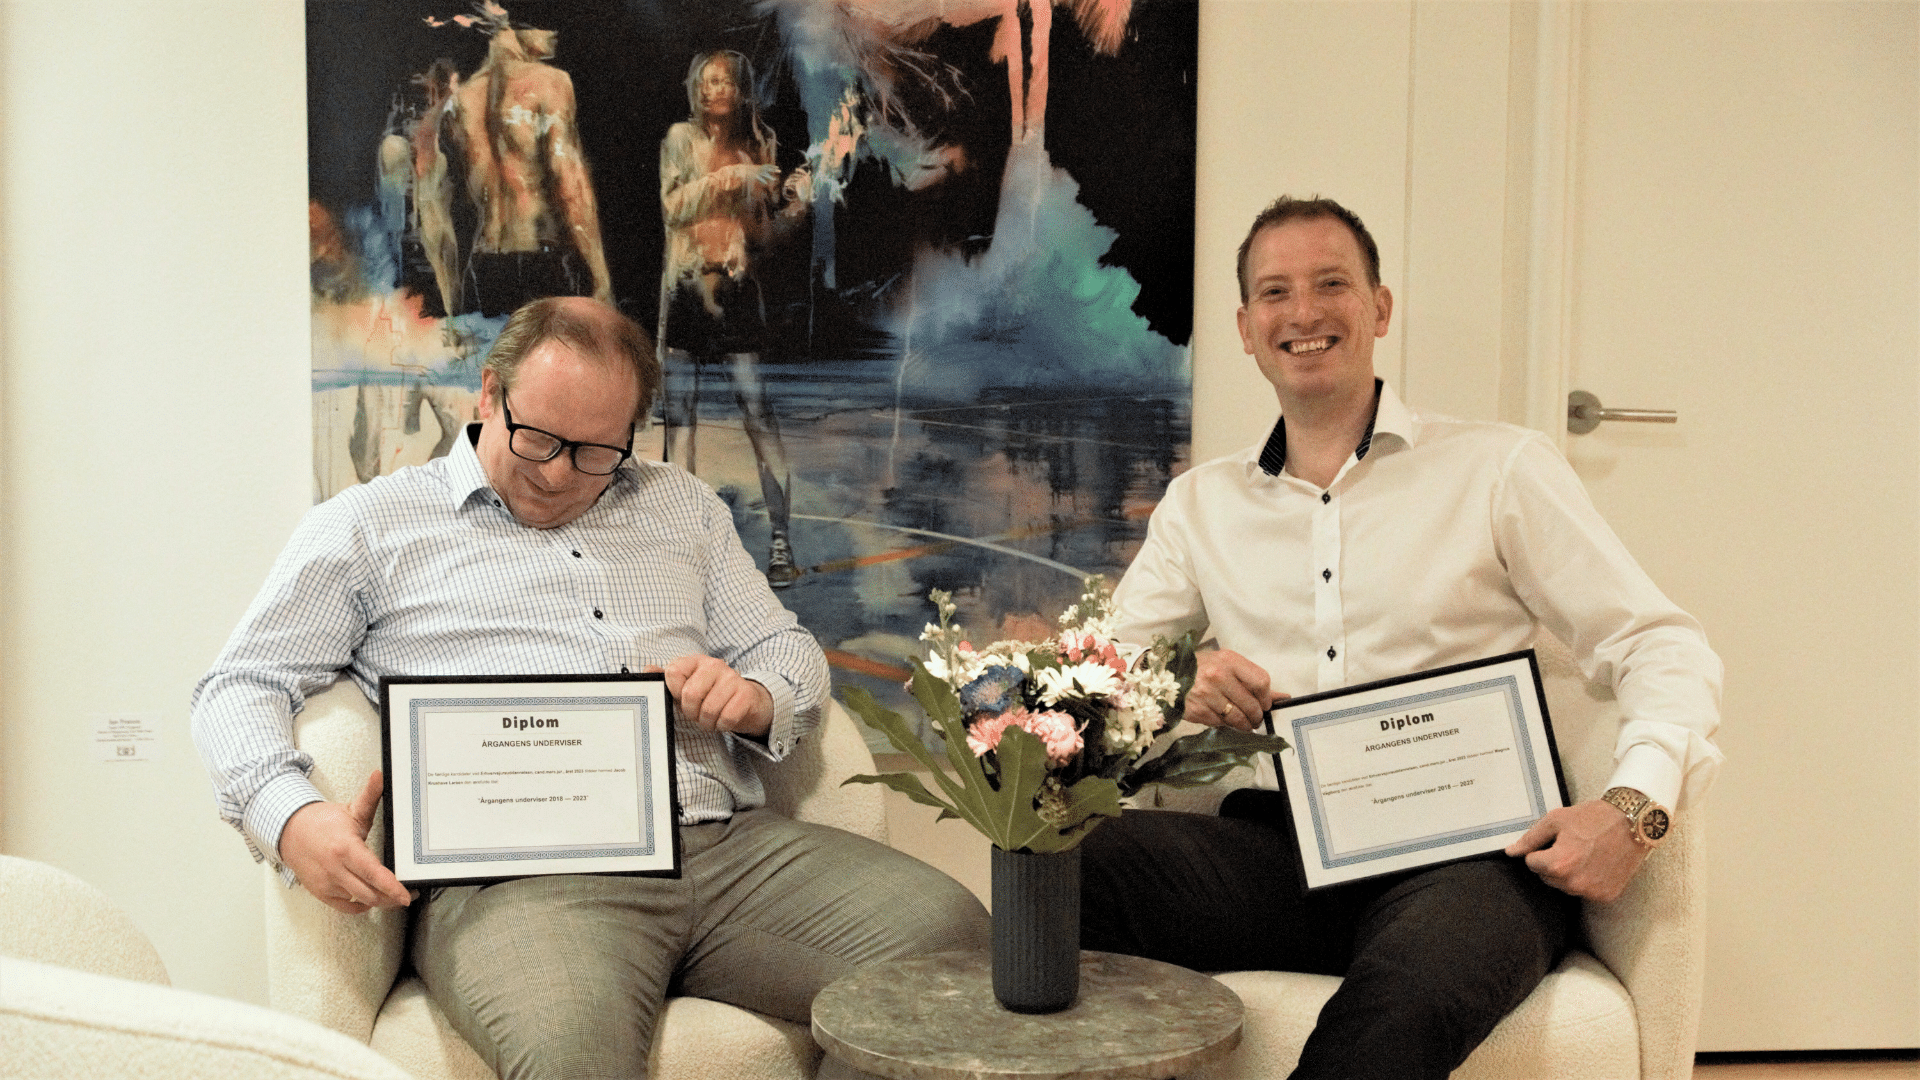 Jacob Krushave and Magnus Vagtborg Sitting in front of a Painting showing their diplomas rewarded to the Best Lecturer by the Class of 2023 Master of Science (MSc) of Business Law at Aalborg University